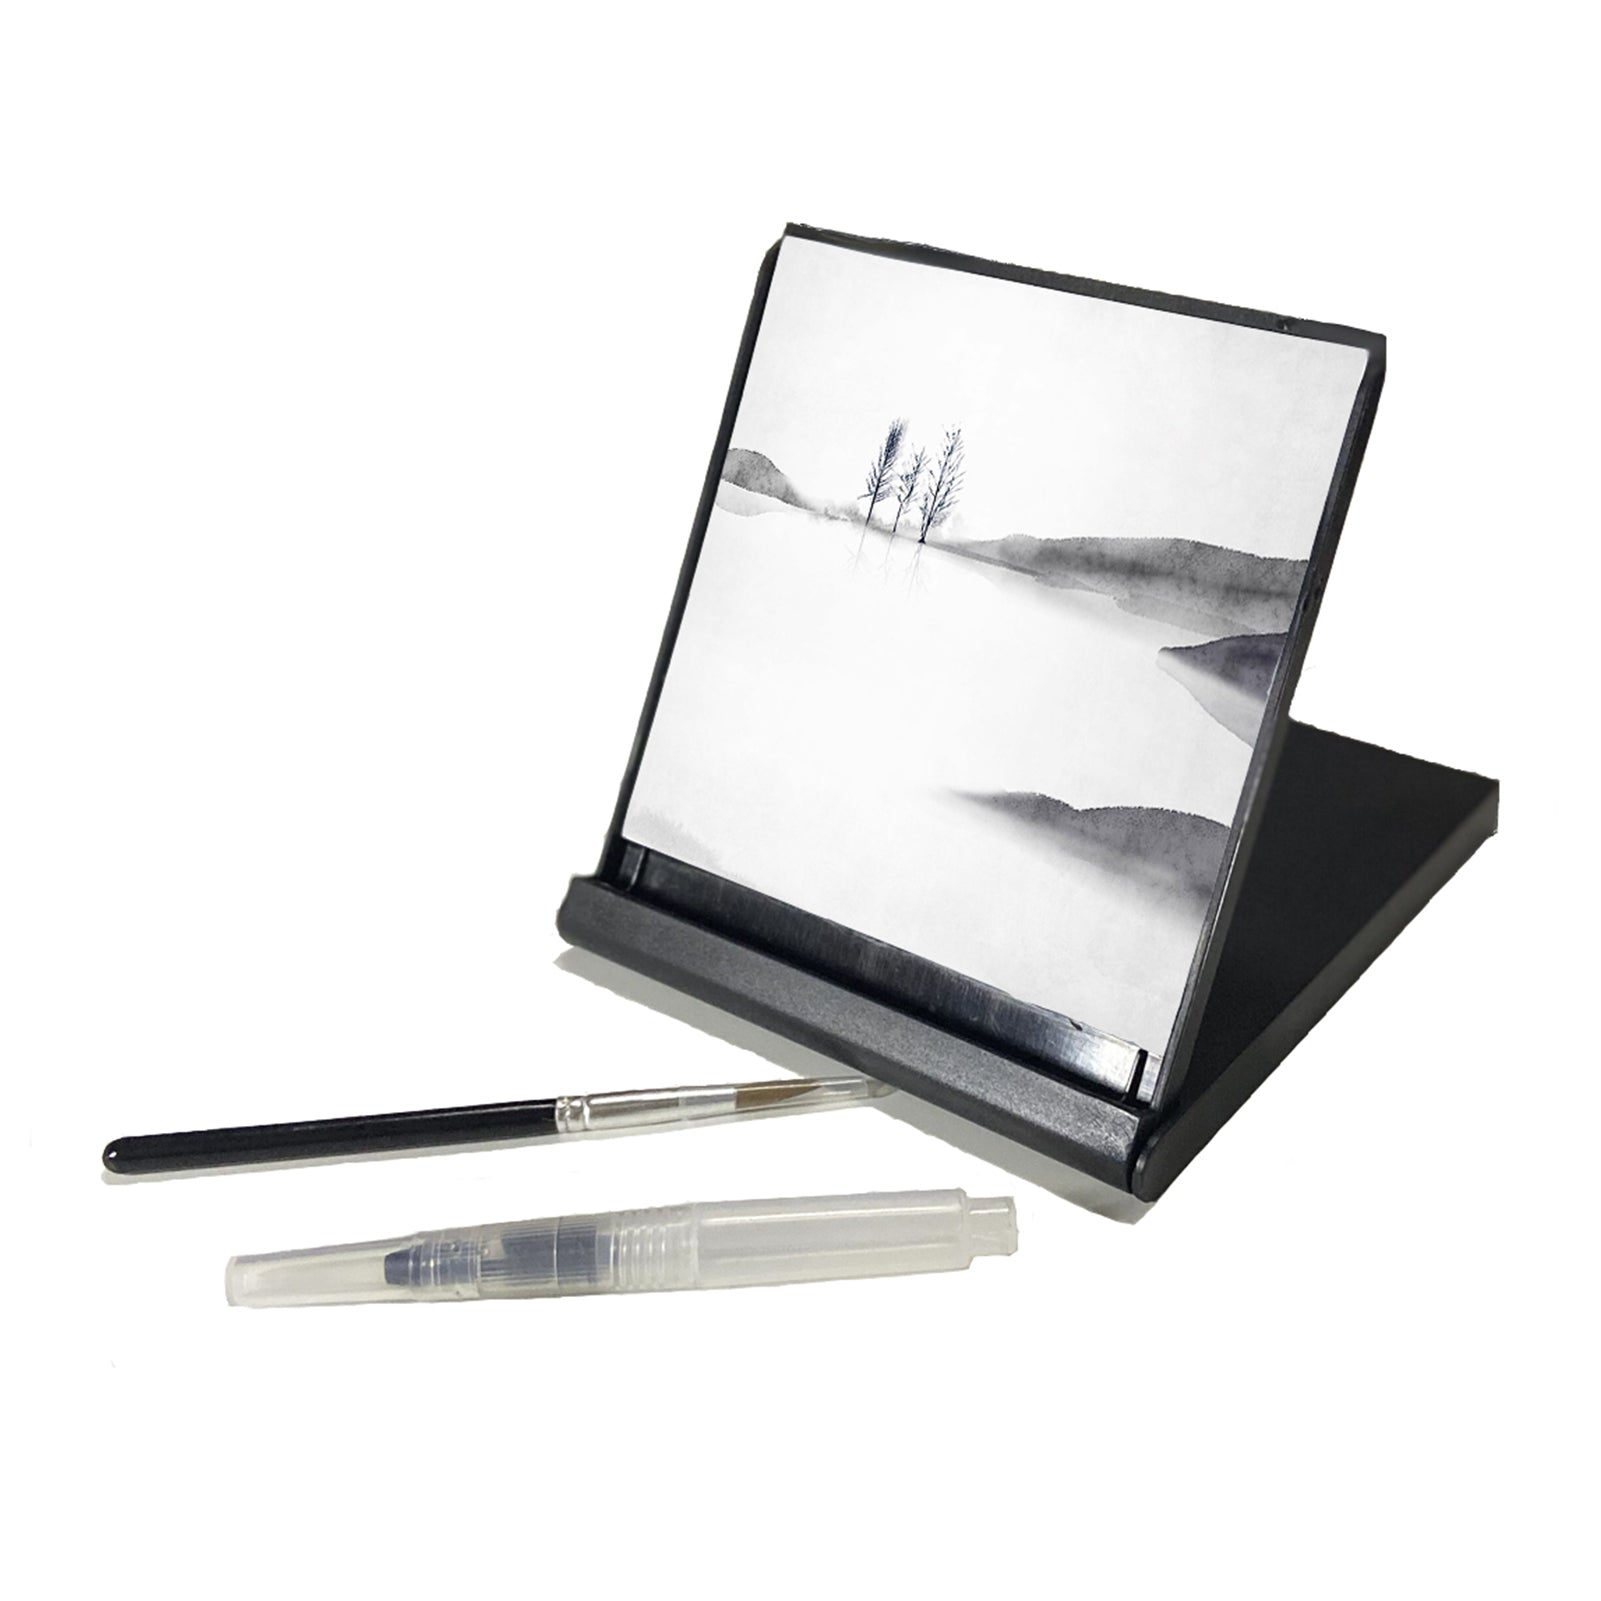 AOVOA Mini Water Drawing Board, Inkless Zen Meditation Board for Drawing,  Painting, Writing & Relaxation, Portable Travel Size with 2 Water Brushes  Lan Ting Xu